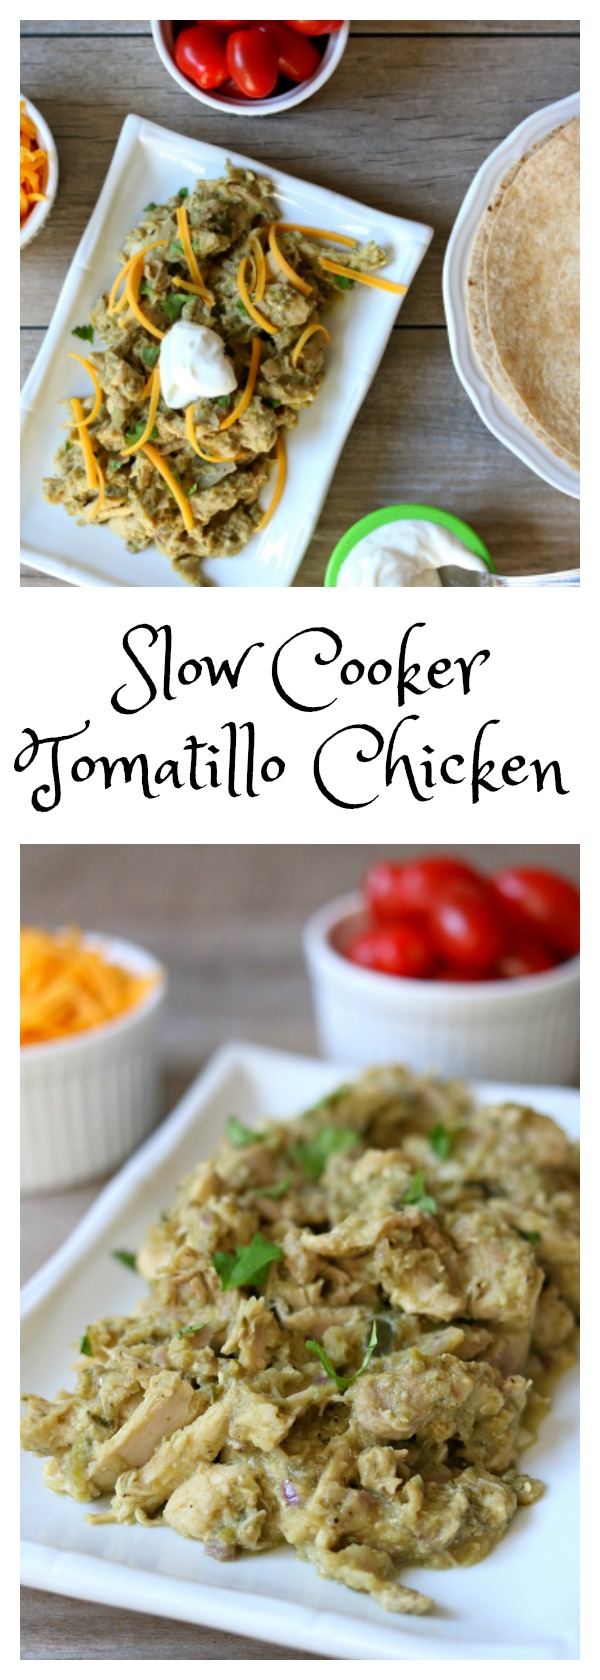 Slow Cooker Tomatillo Chicken Filling: tender, moist pieces of shredded chicken with an almost creamy (but healthy) sauce that is tomatillo based. This Slow Cooker Tomatillo Chicken Filling is perfect for tacos, enchiladas, burritos, salads or plain!